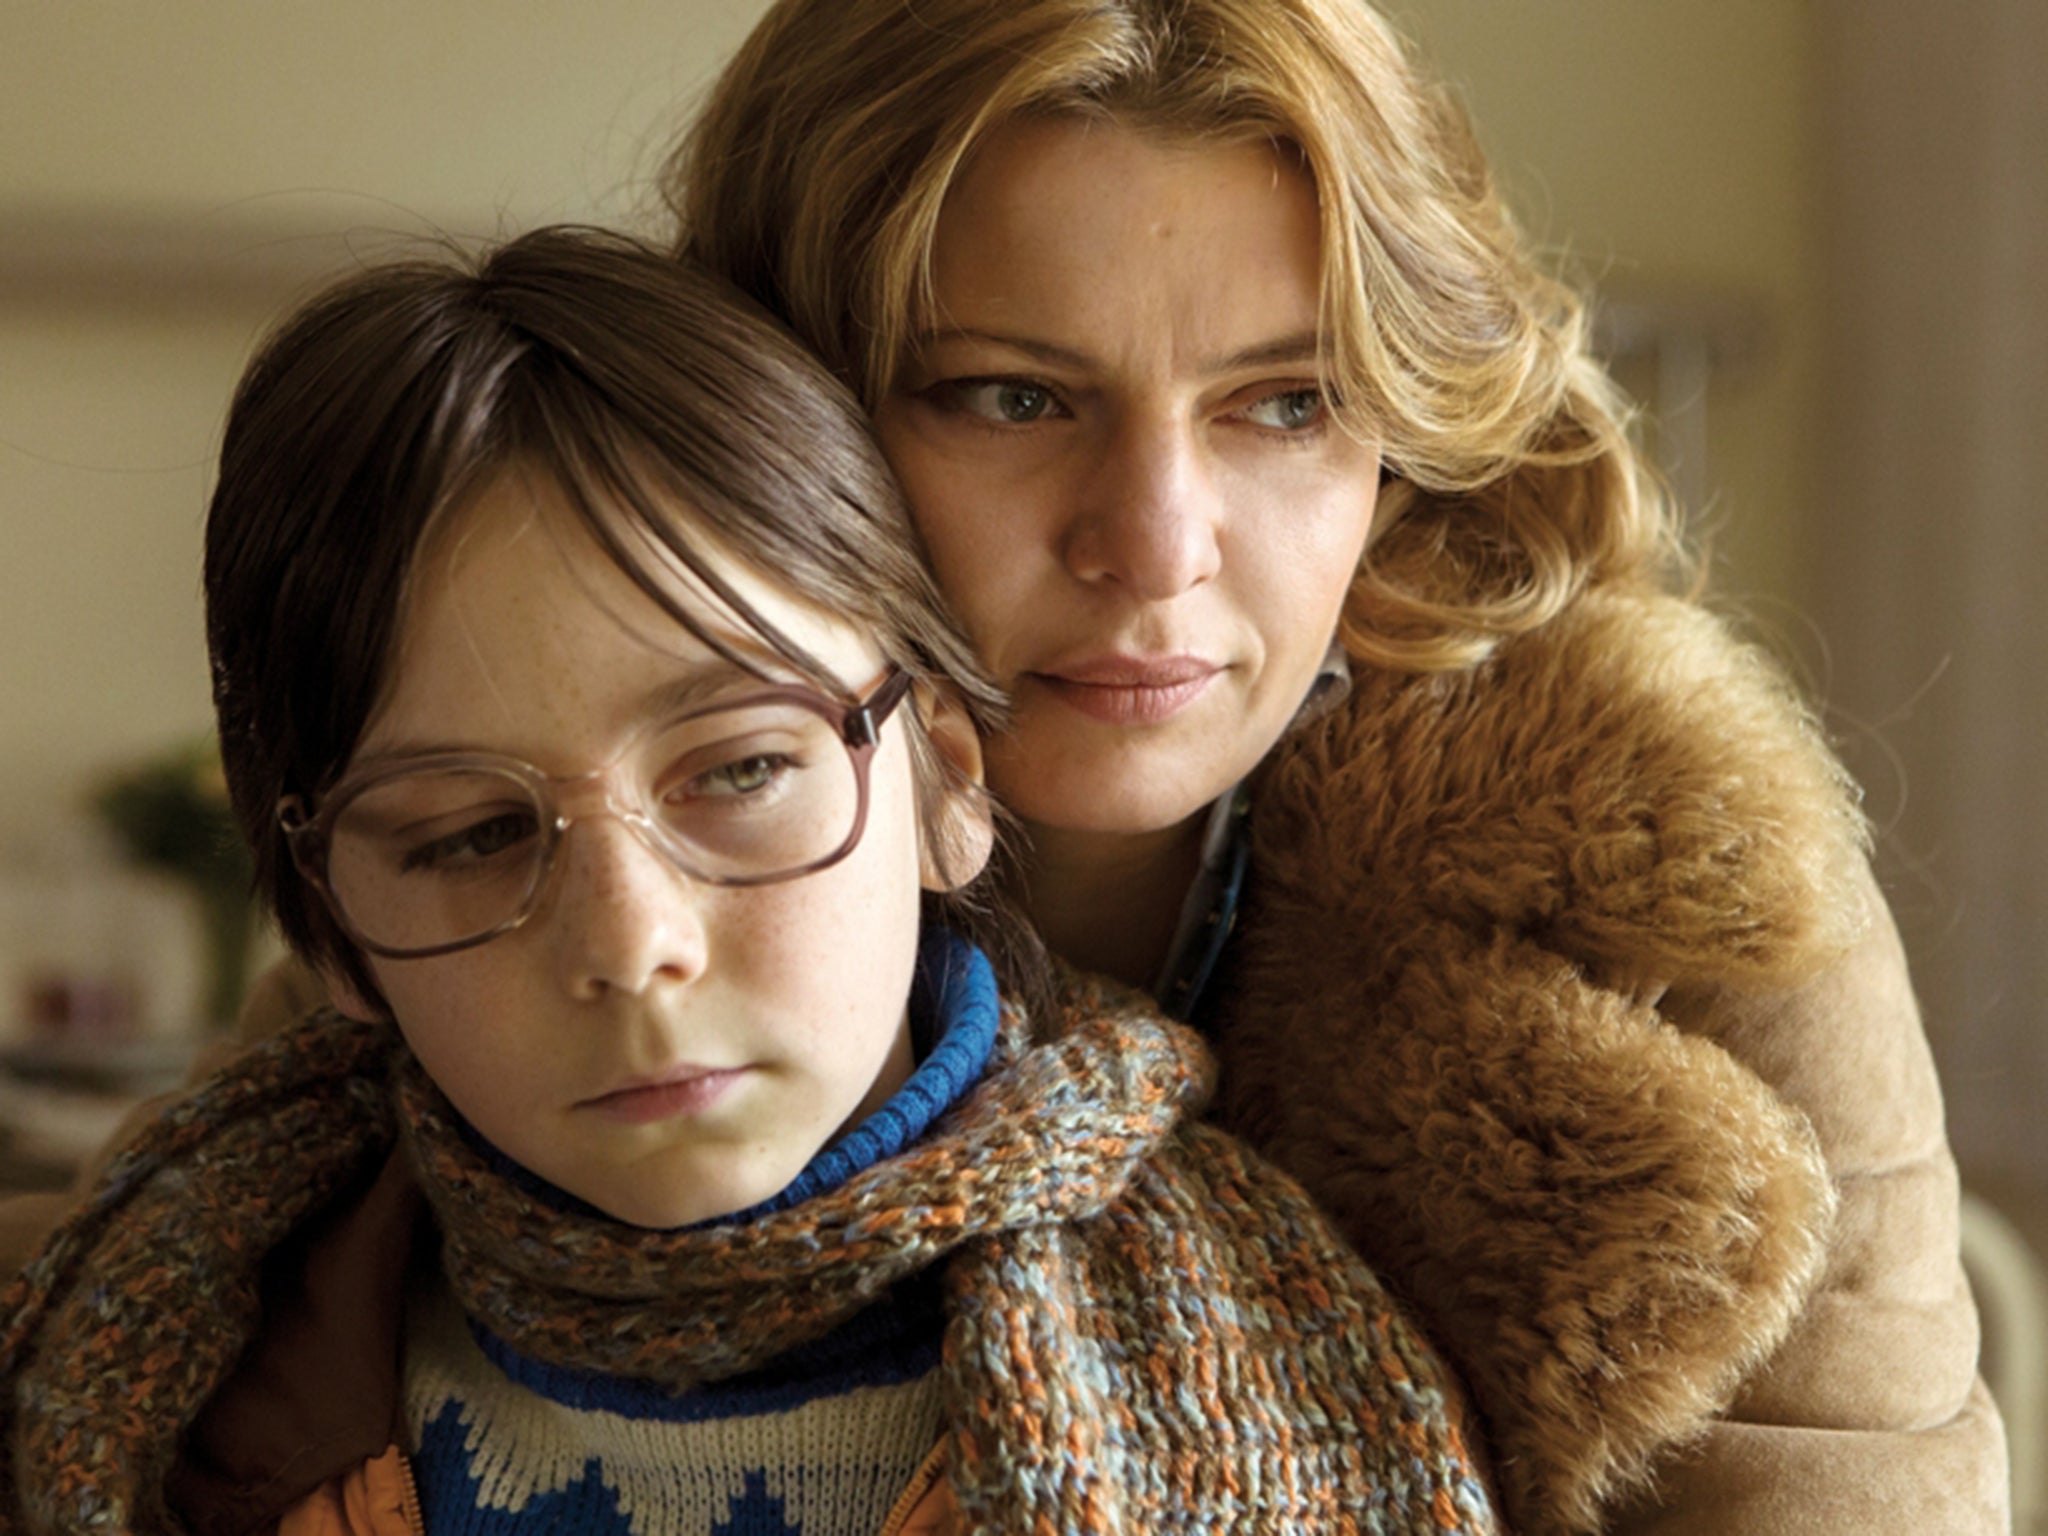 Jördis Triebel stars as a young East German woman trying to build a new life in the west with her son